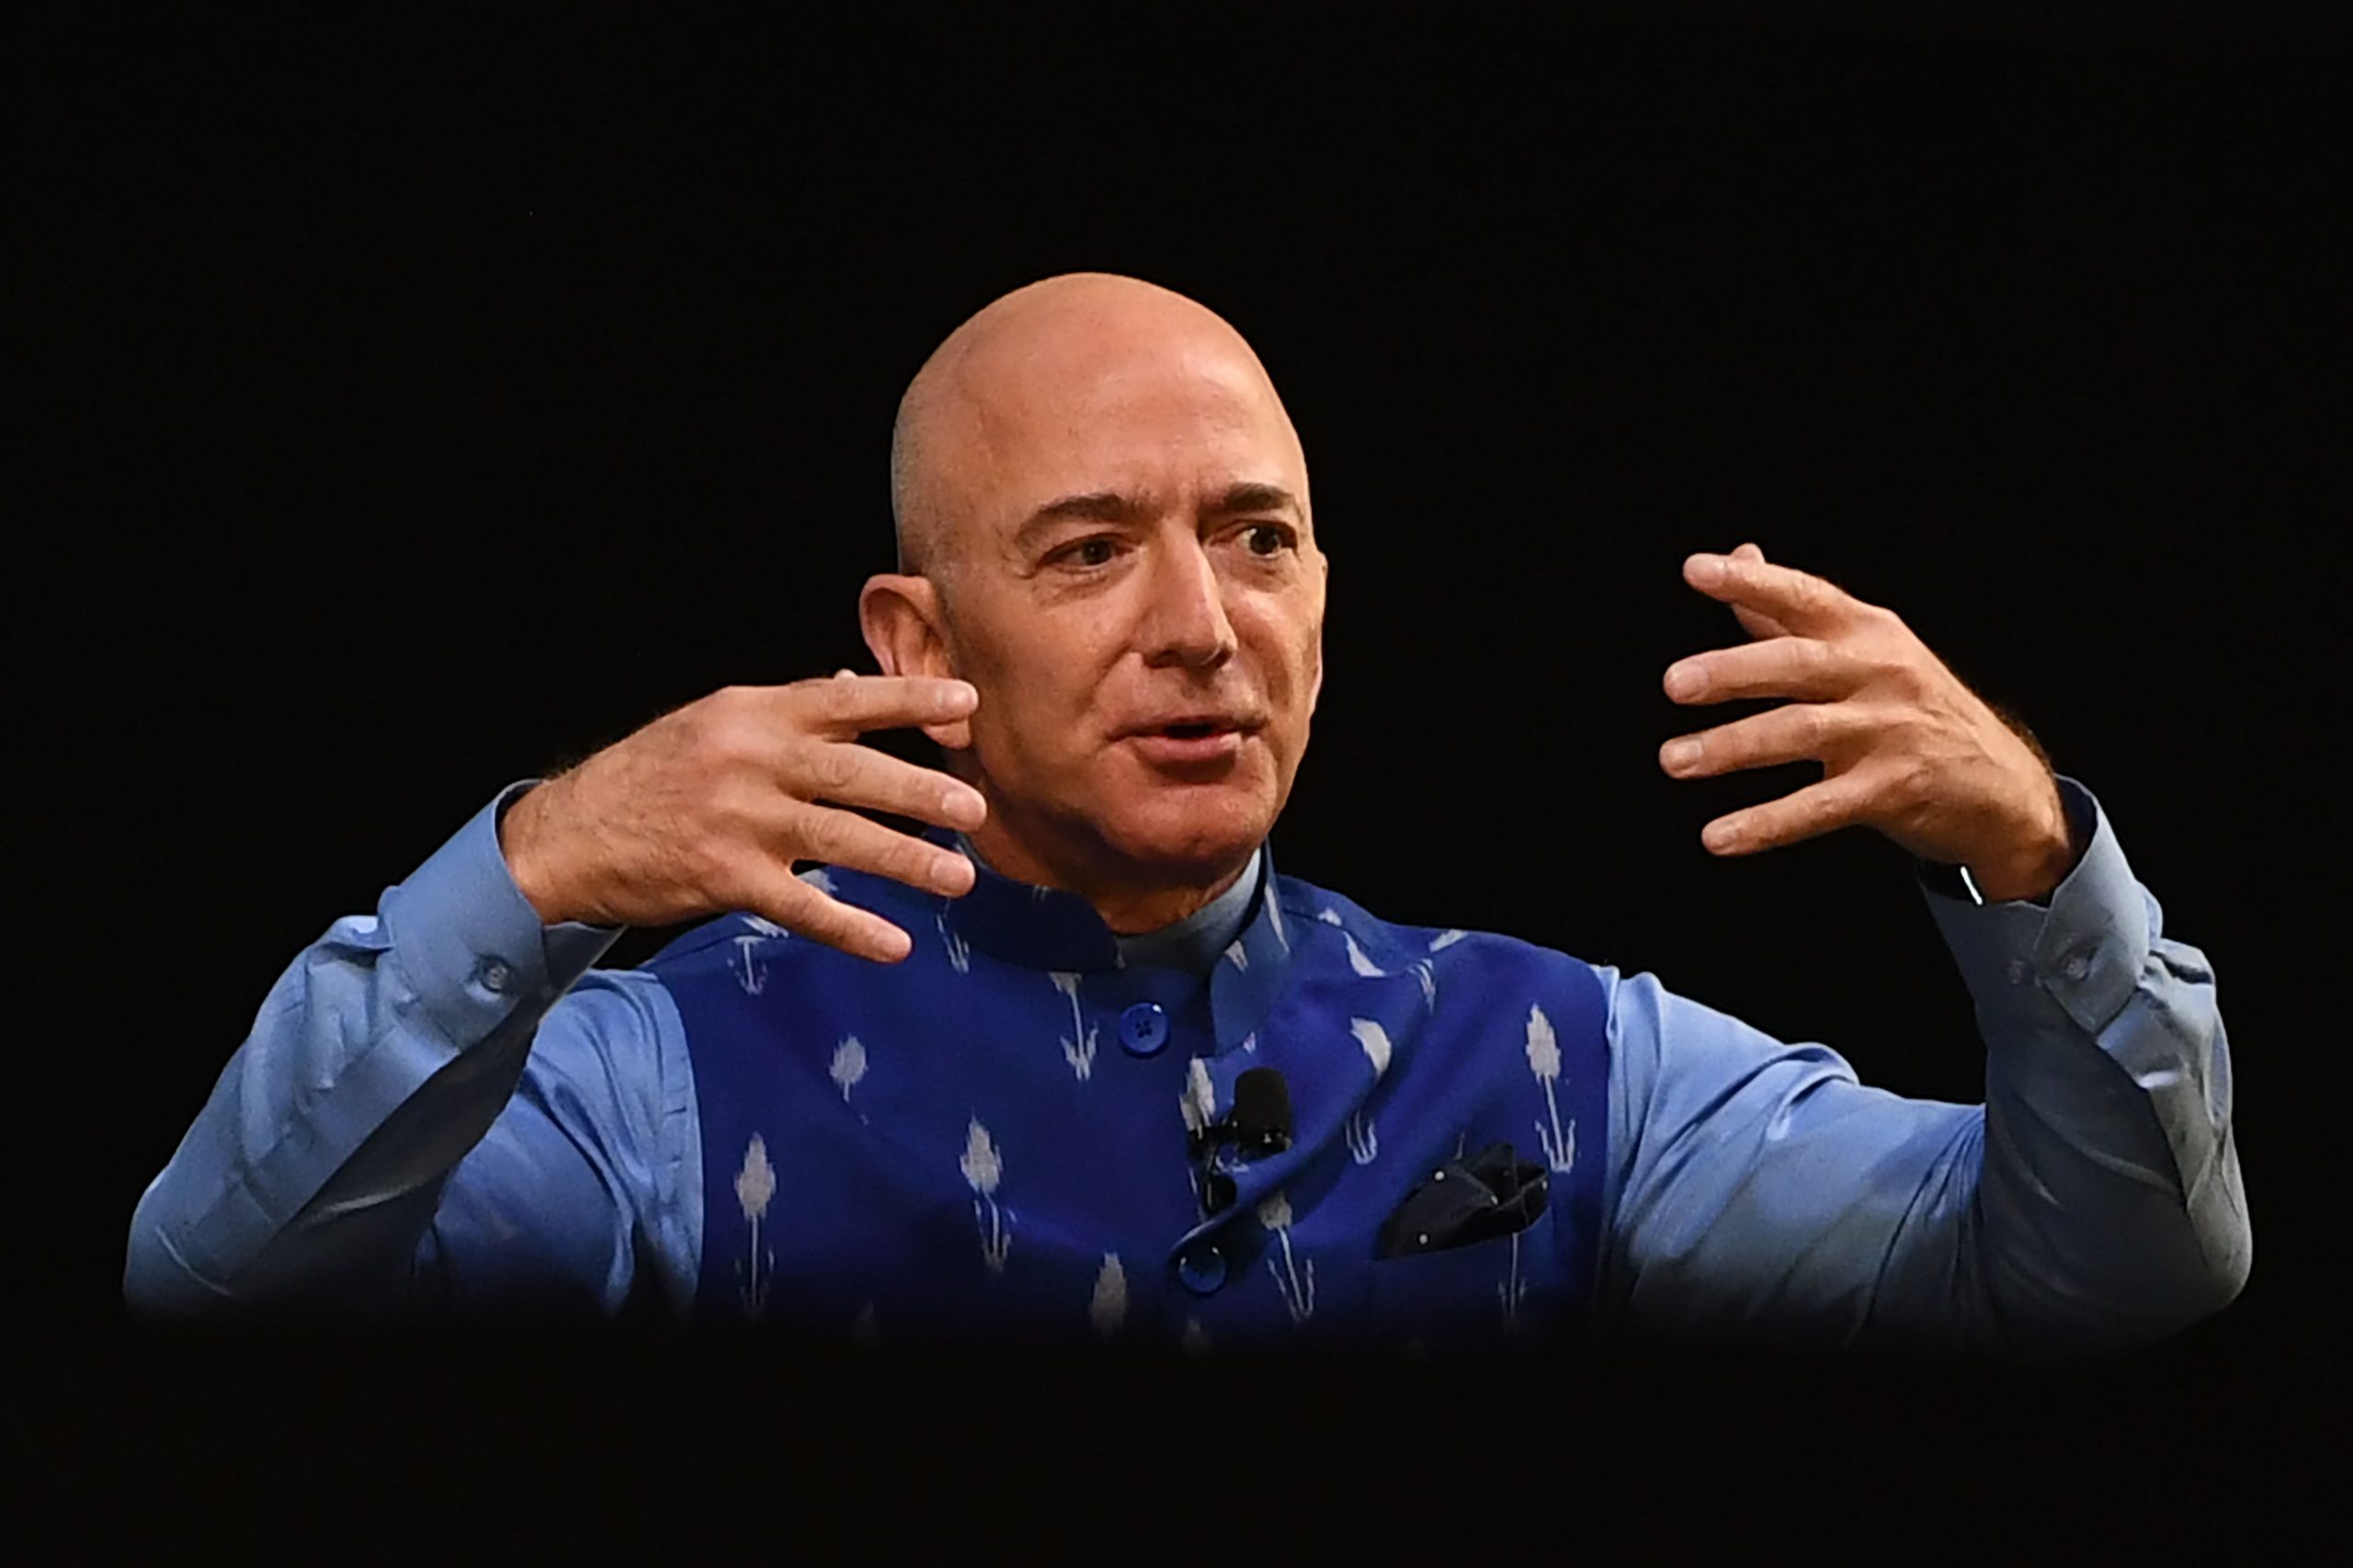 Jeff Bezos rings in the new year 2022 with a ‘crazy disco party’